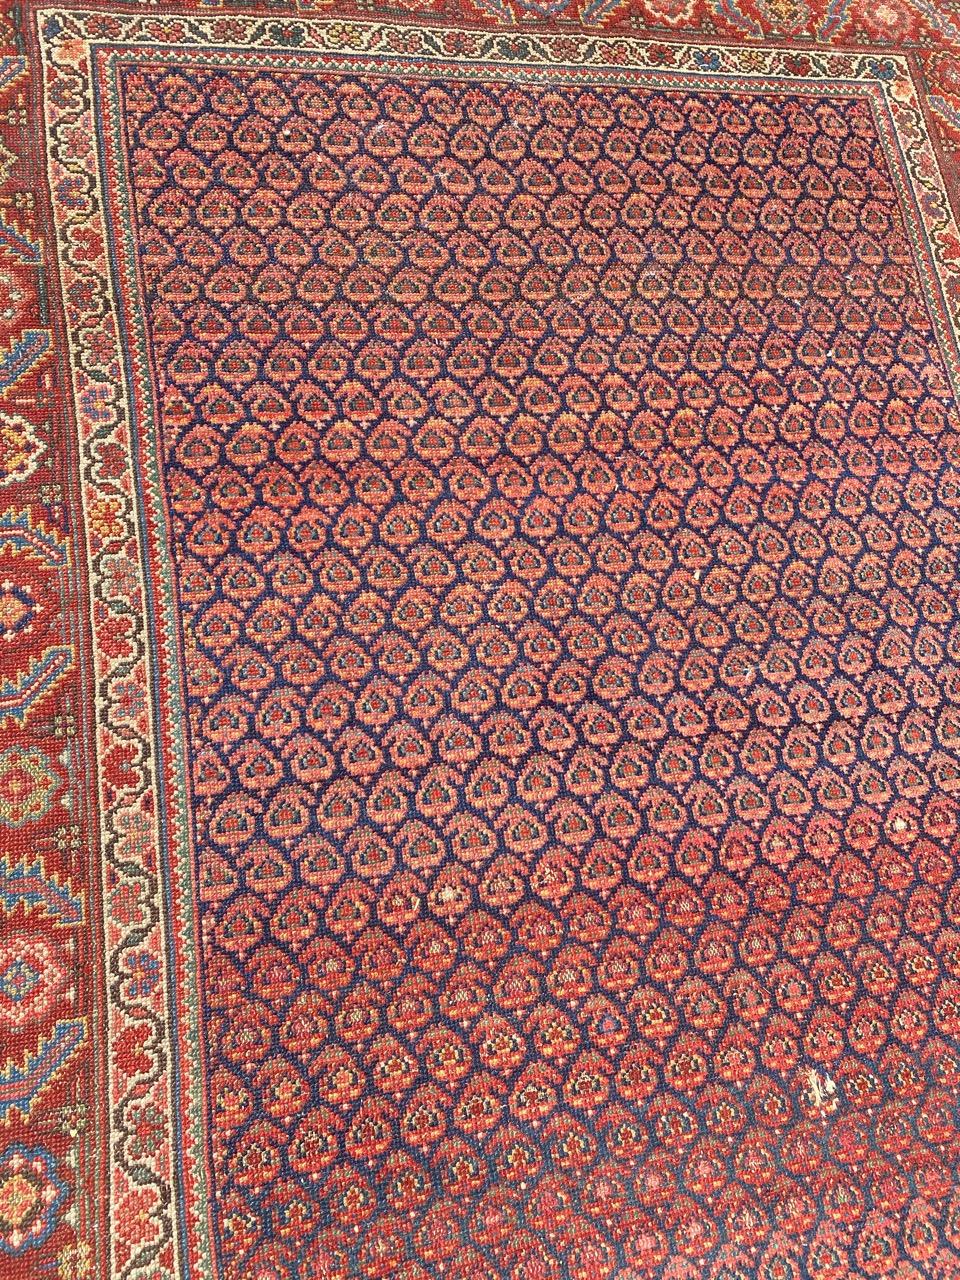 Bobyrug’s Wonderful Antique Malayer Runner In Good Condition For Sale In Saint Ouen, FR